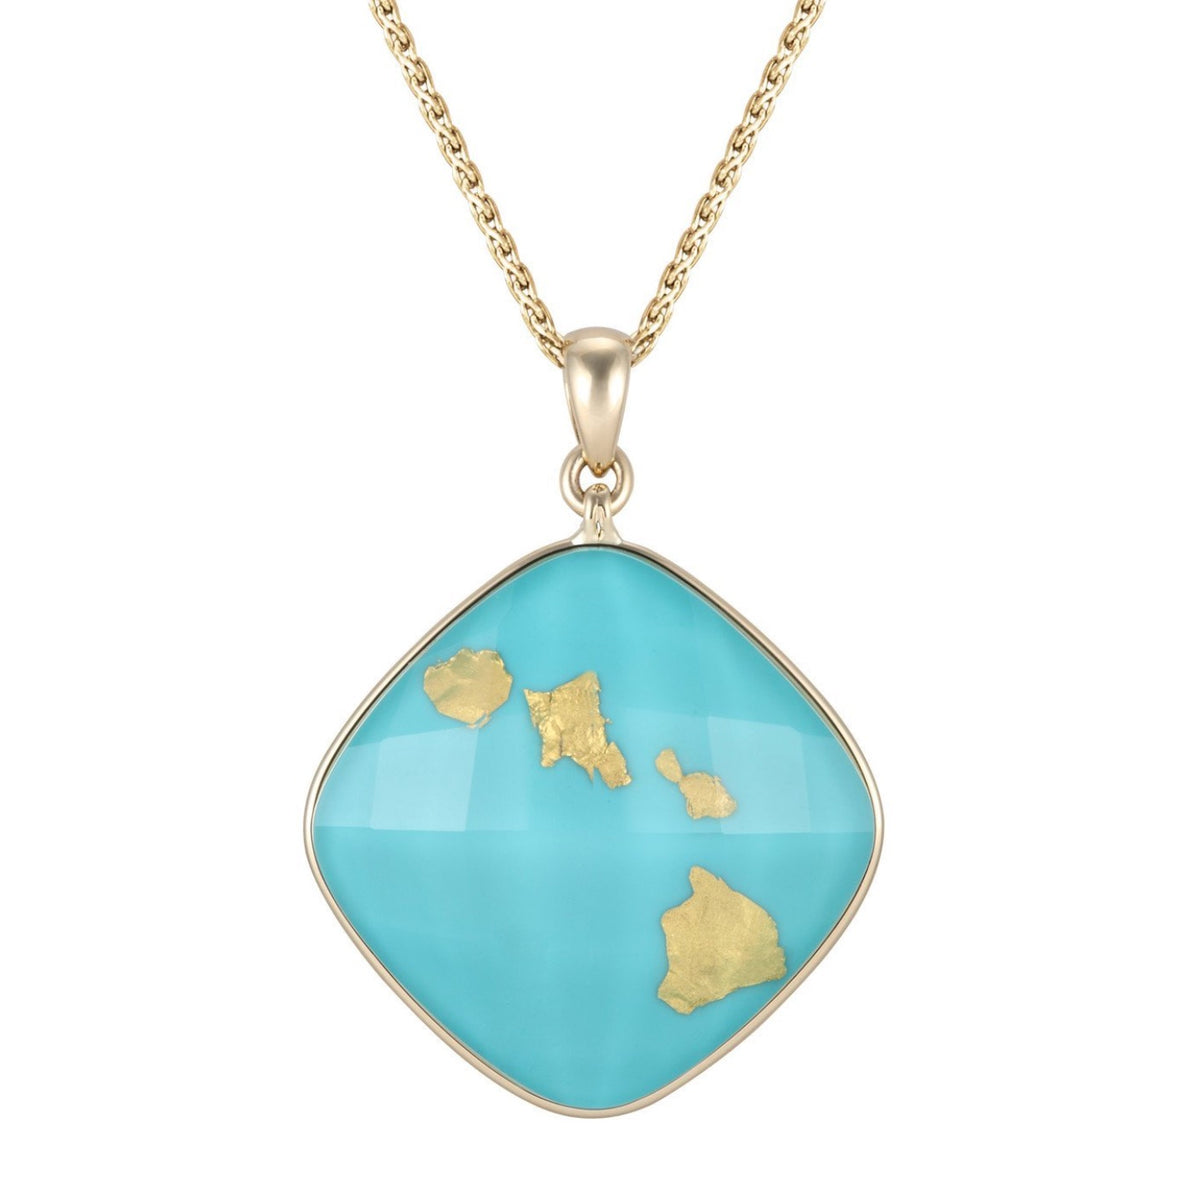 Buy Necklaces Online | Dolphin Galleries